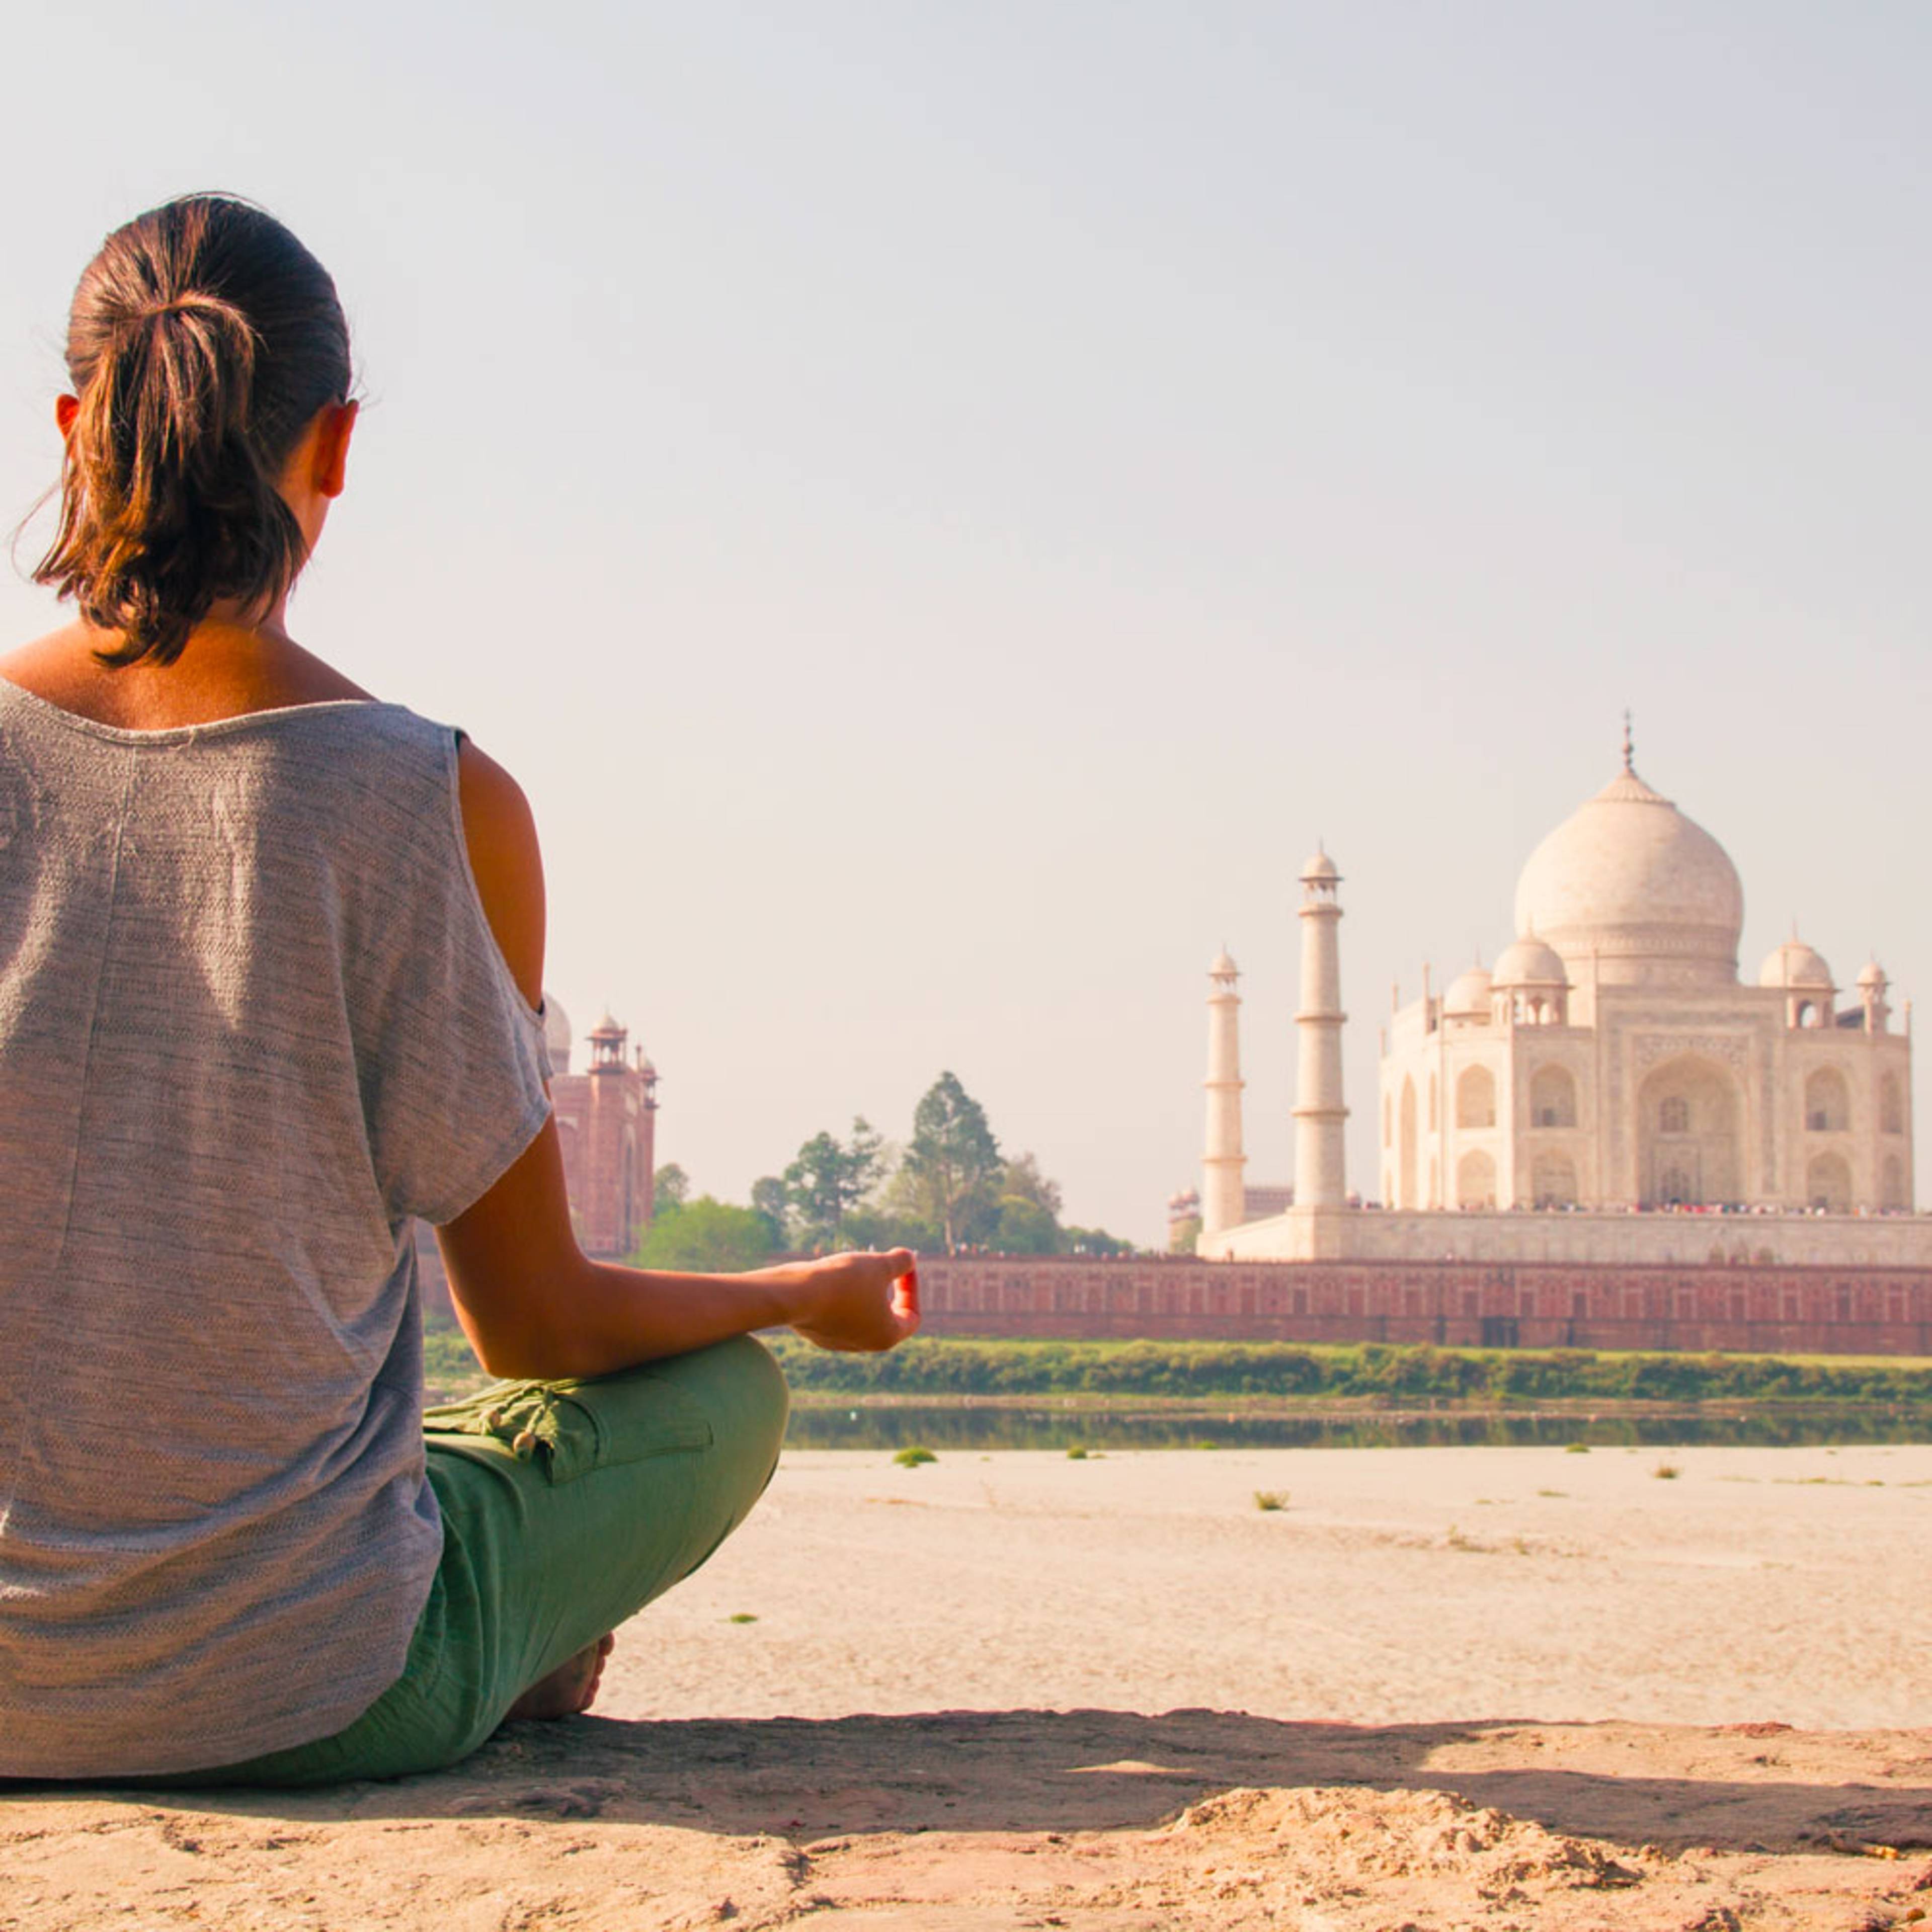 Experience yoga in India with a hand-picked local expert